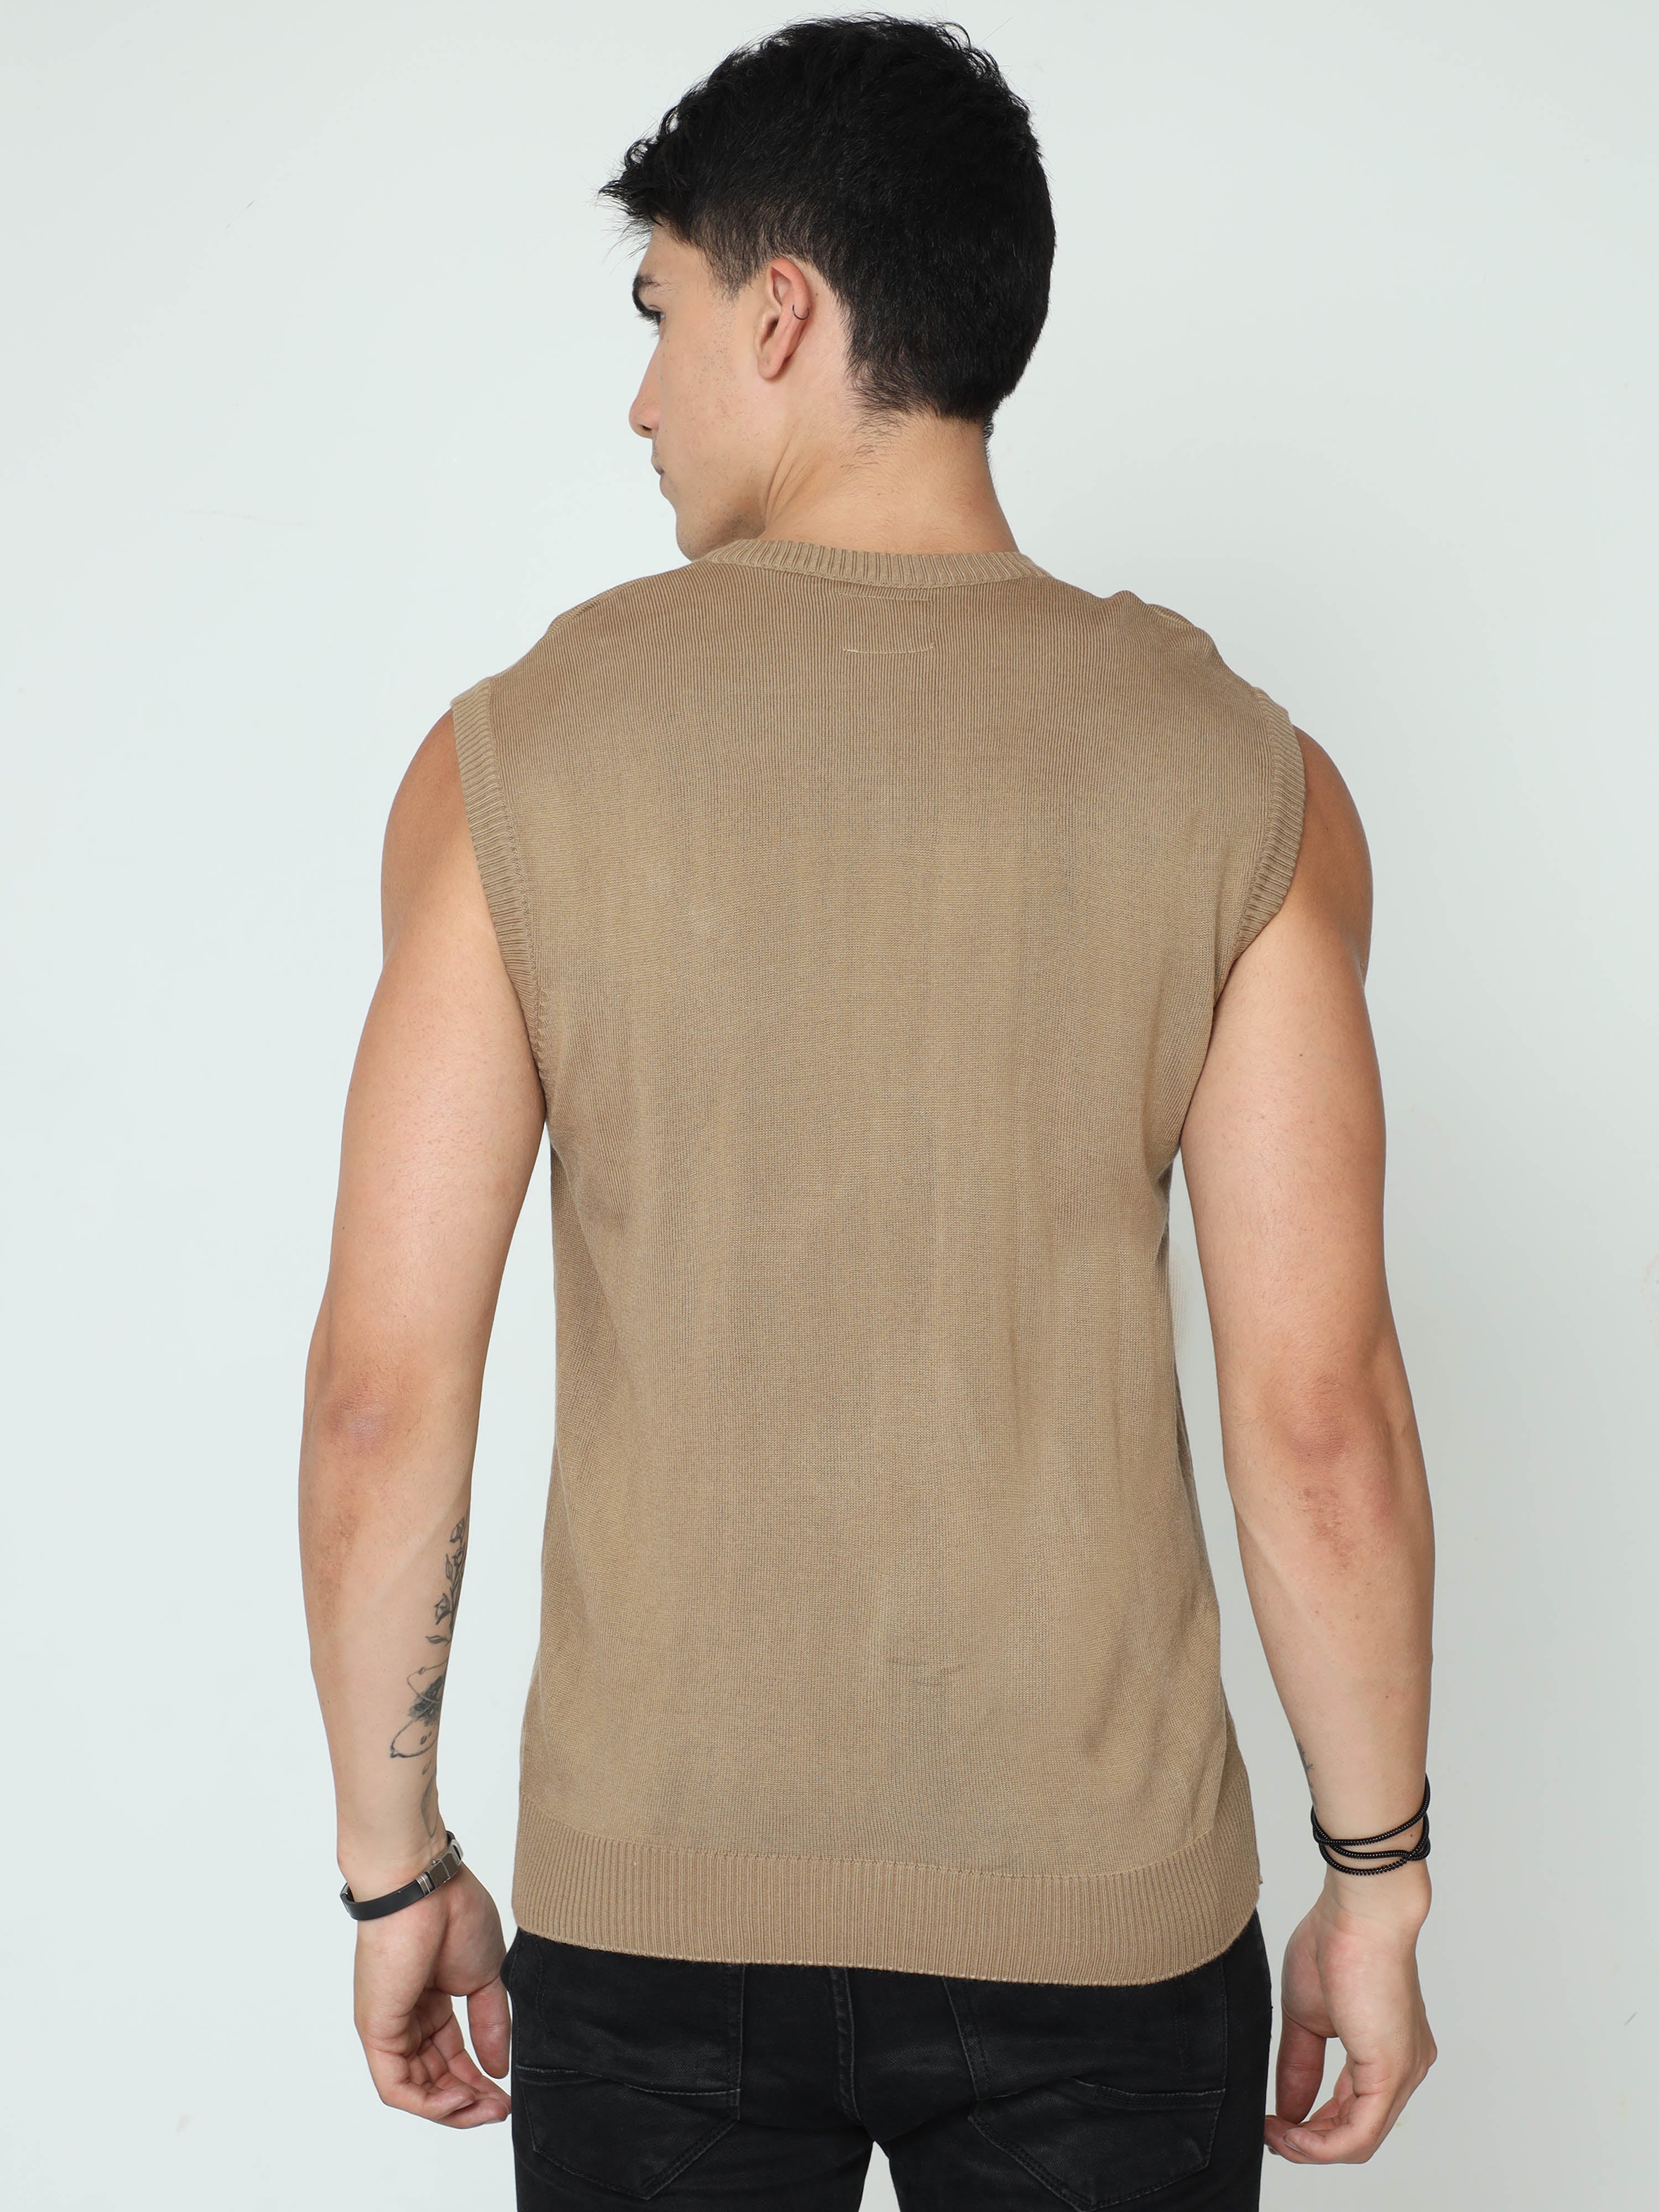 Classic Polo Mens 100% Cotton Cream Solid V Neck Sleeveless Slim Fit Sweater |Cp-Swt-10